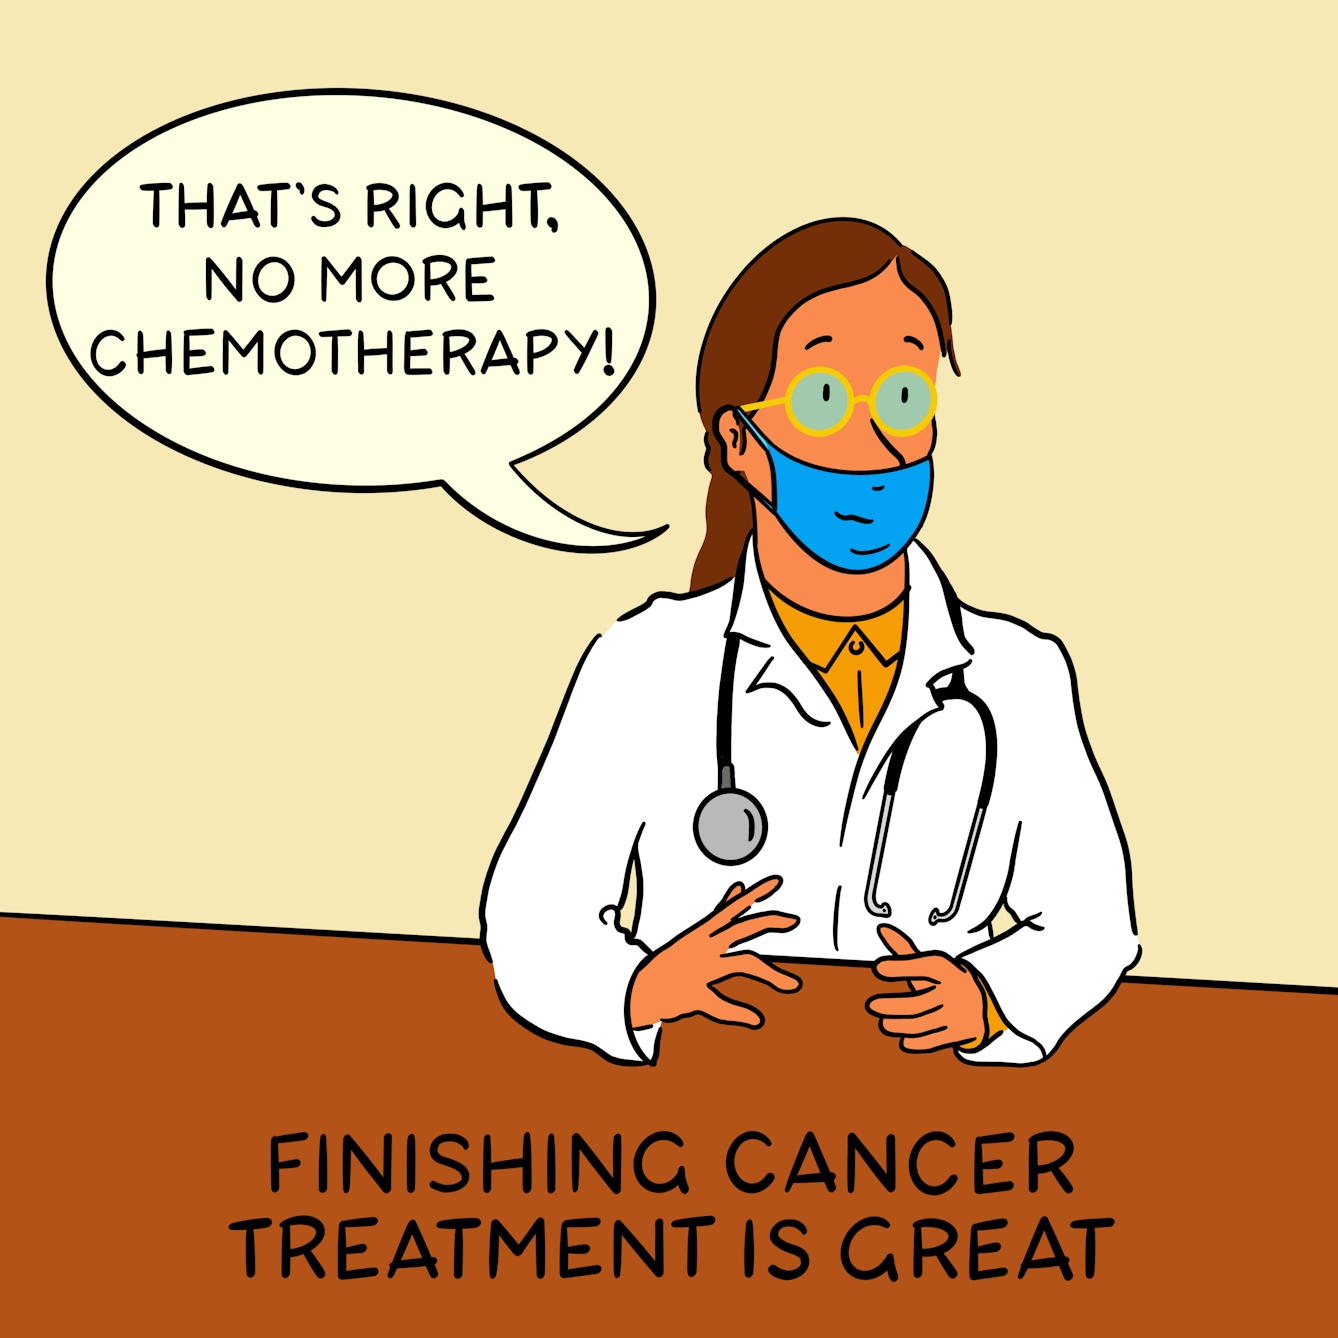 Panel 1 of a four-panel comic drawn digitally: a doctor with a white coat, stethoscope, blue mask and glasses says "That's right, no more chemotherapy!". The caption text reads "Finishing cancer treatment is great"